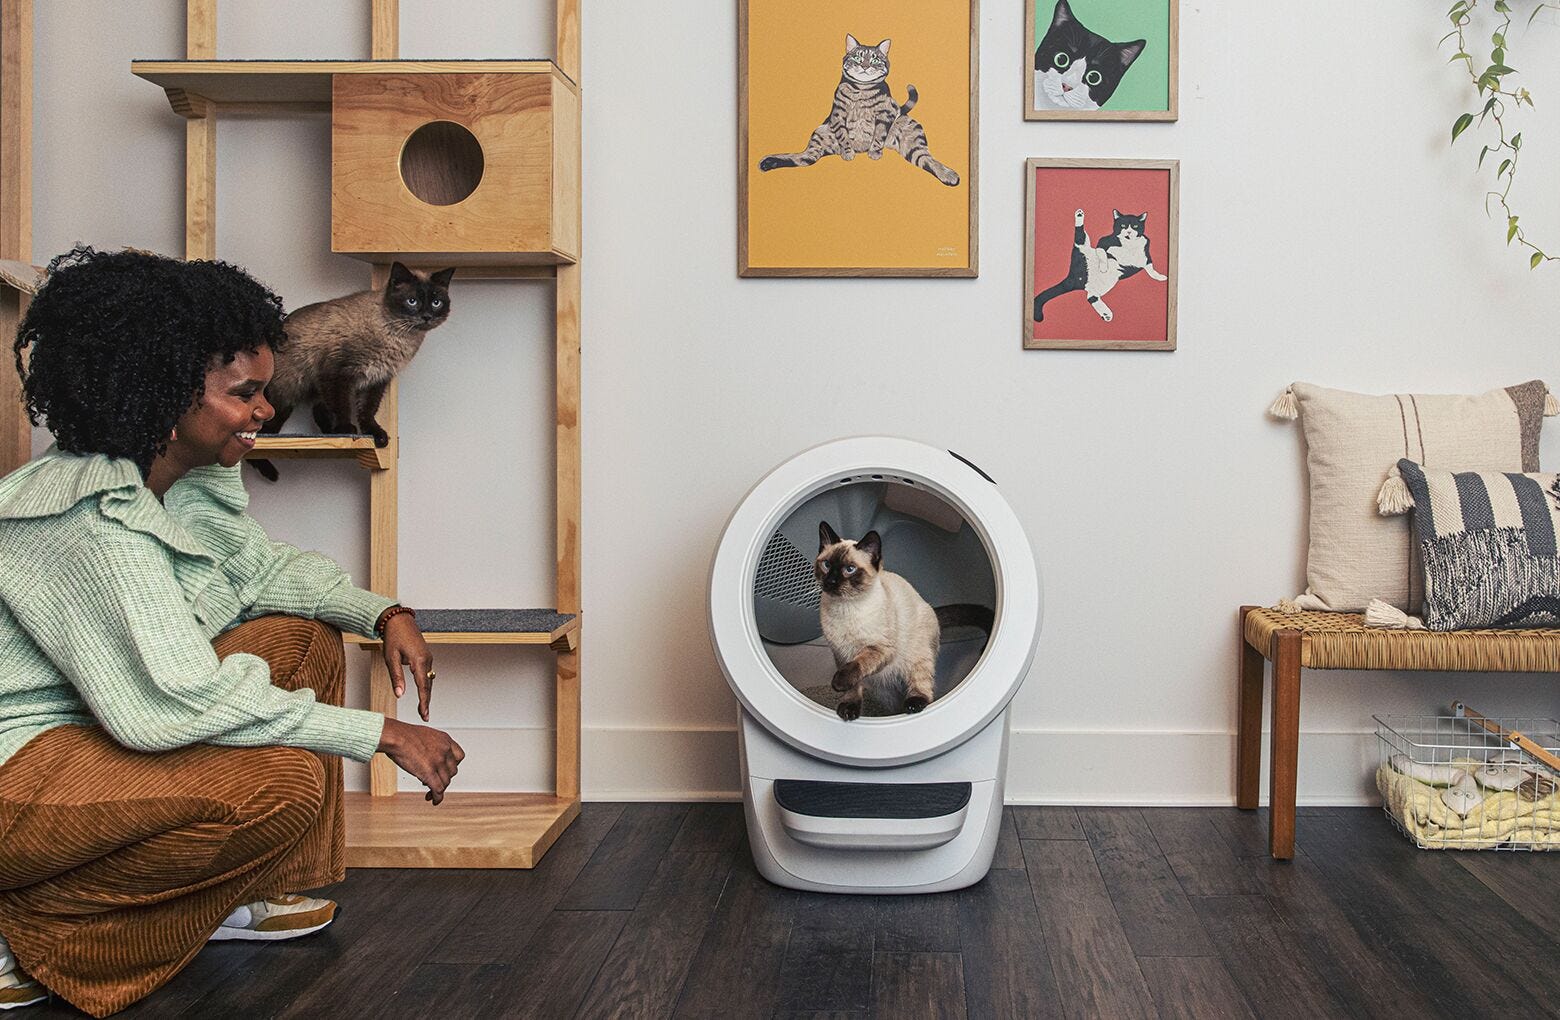 woman standing next to litter robot with Siamese cat inside